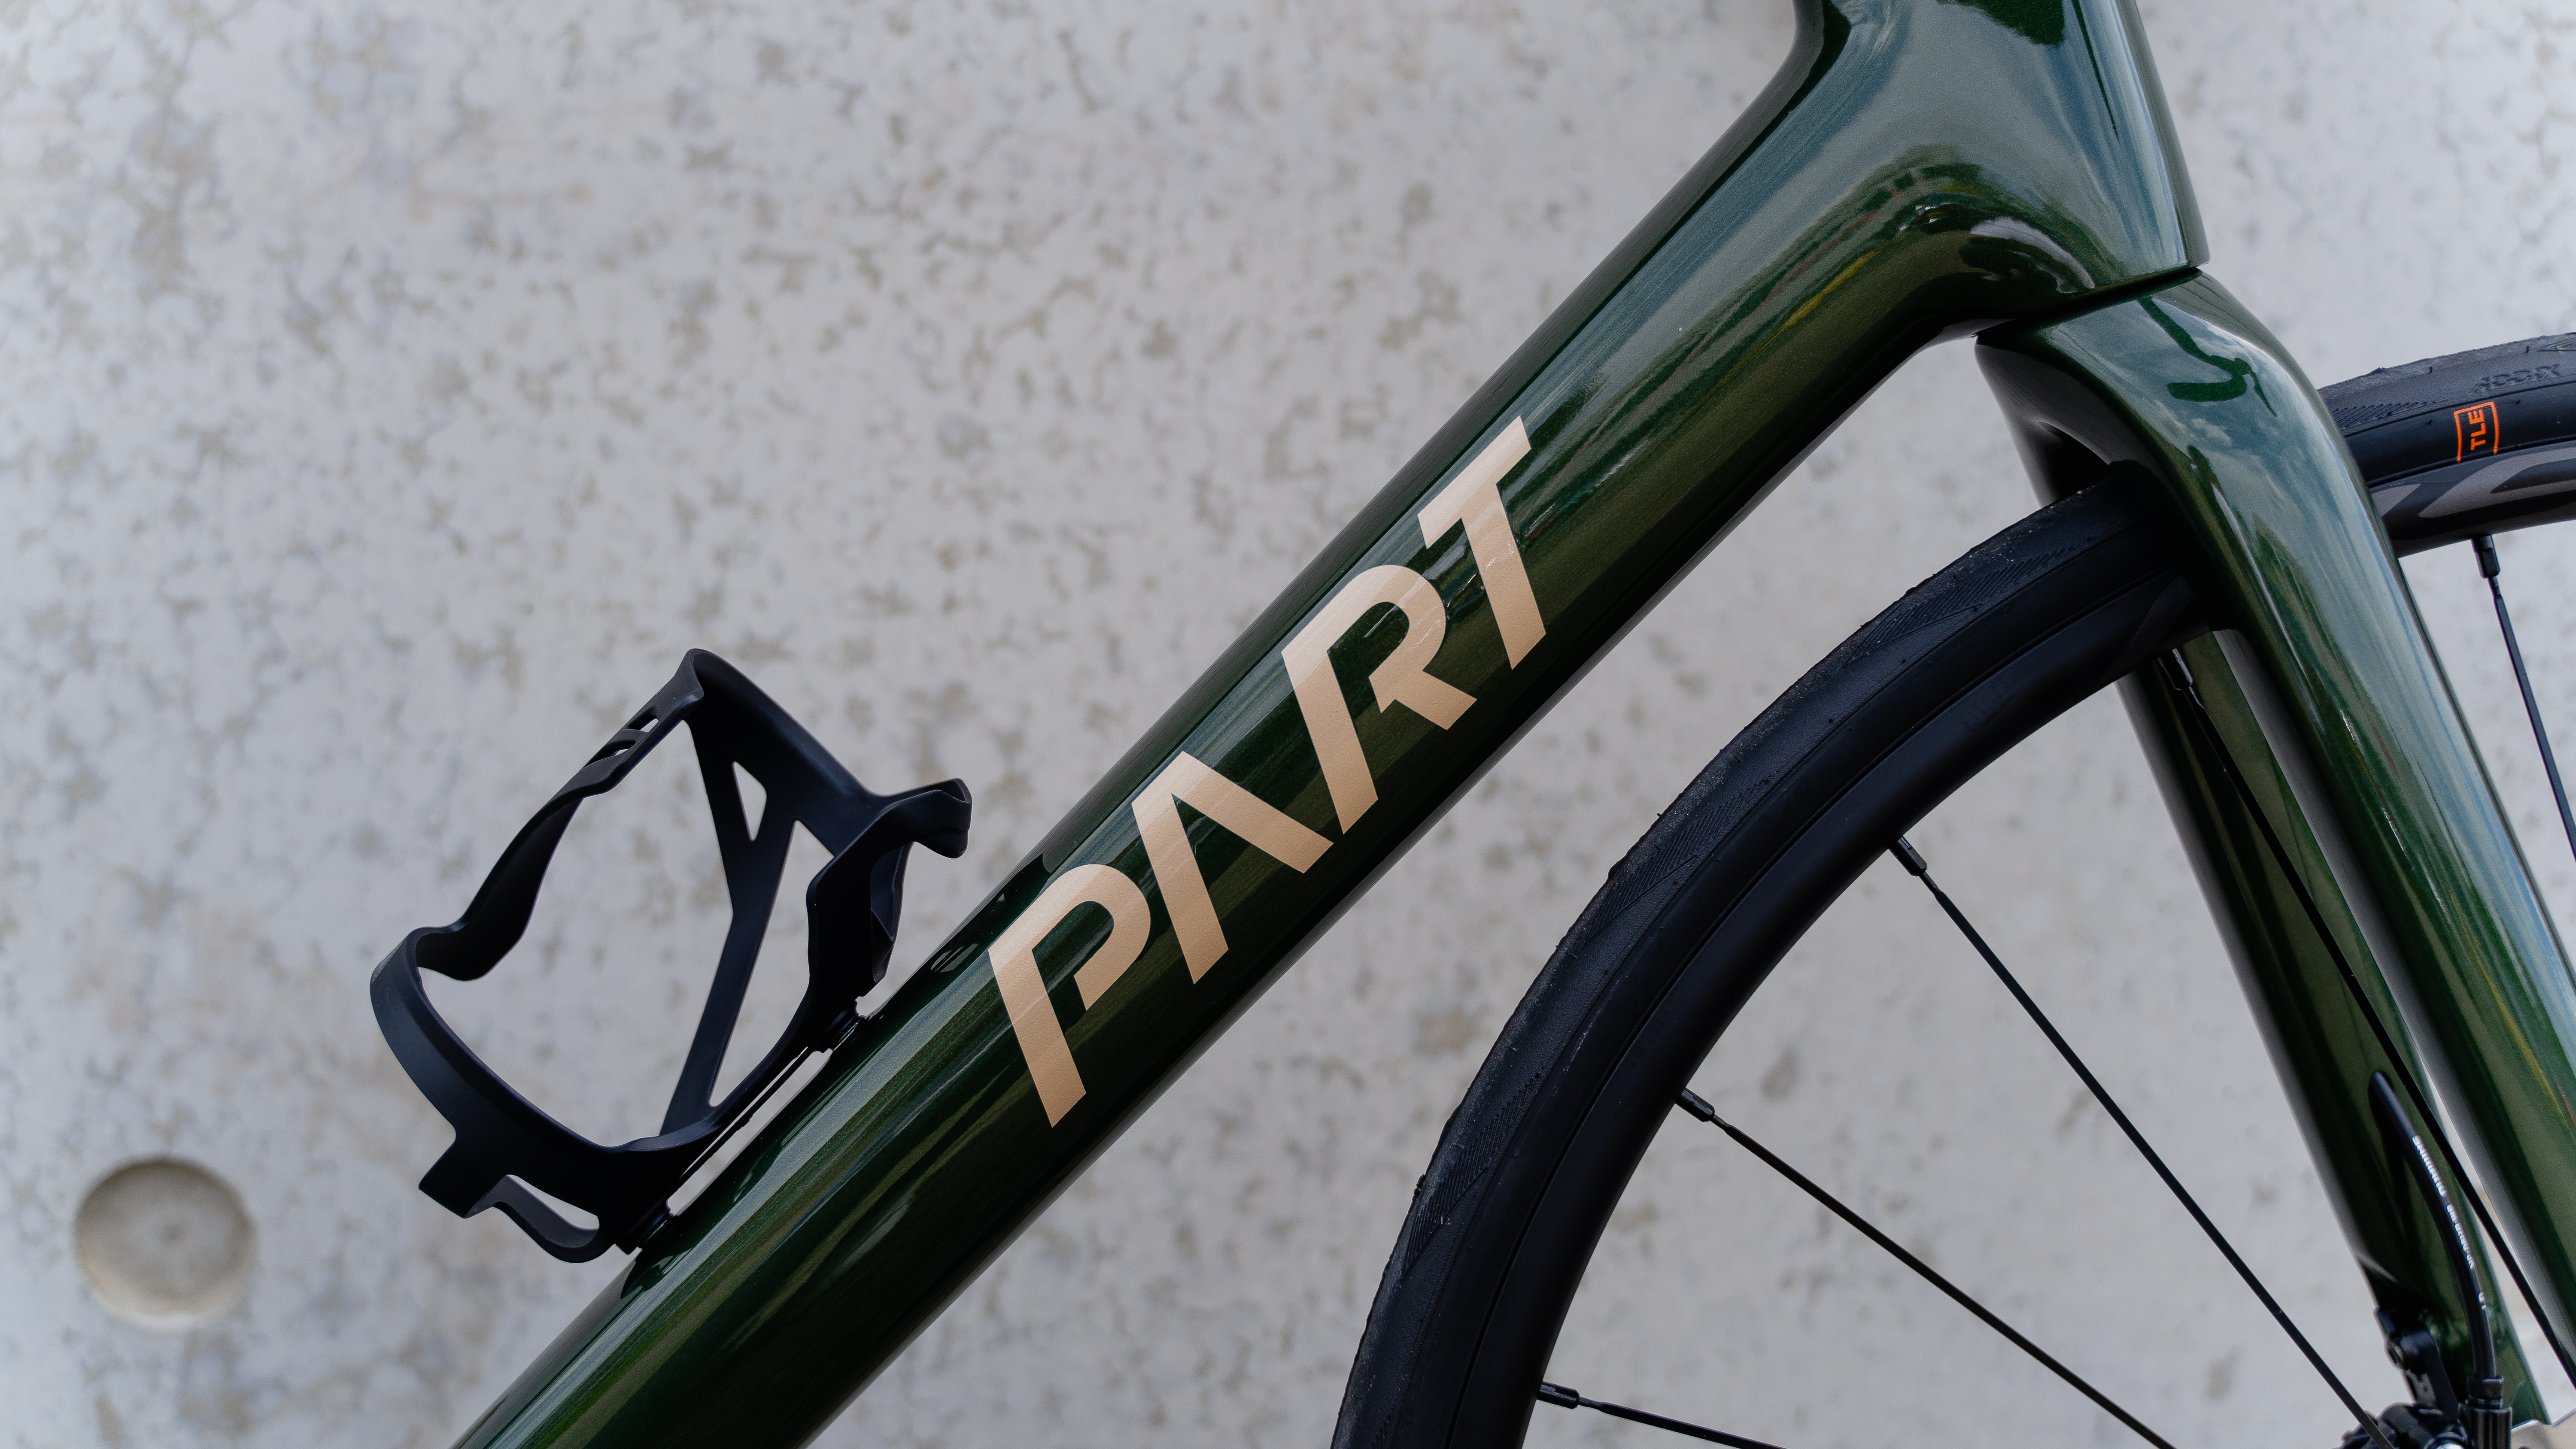 Part Cycling | Exclusieve racefiets